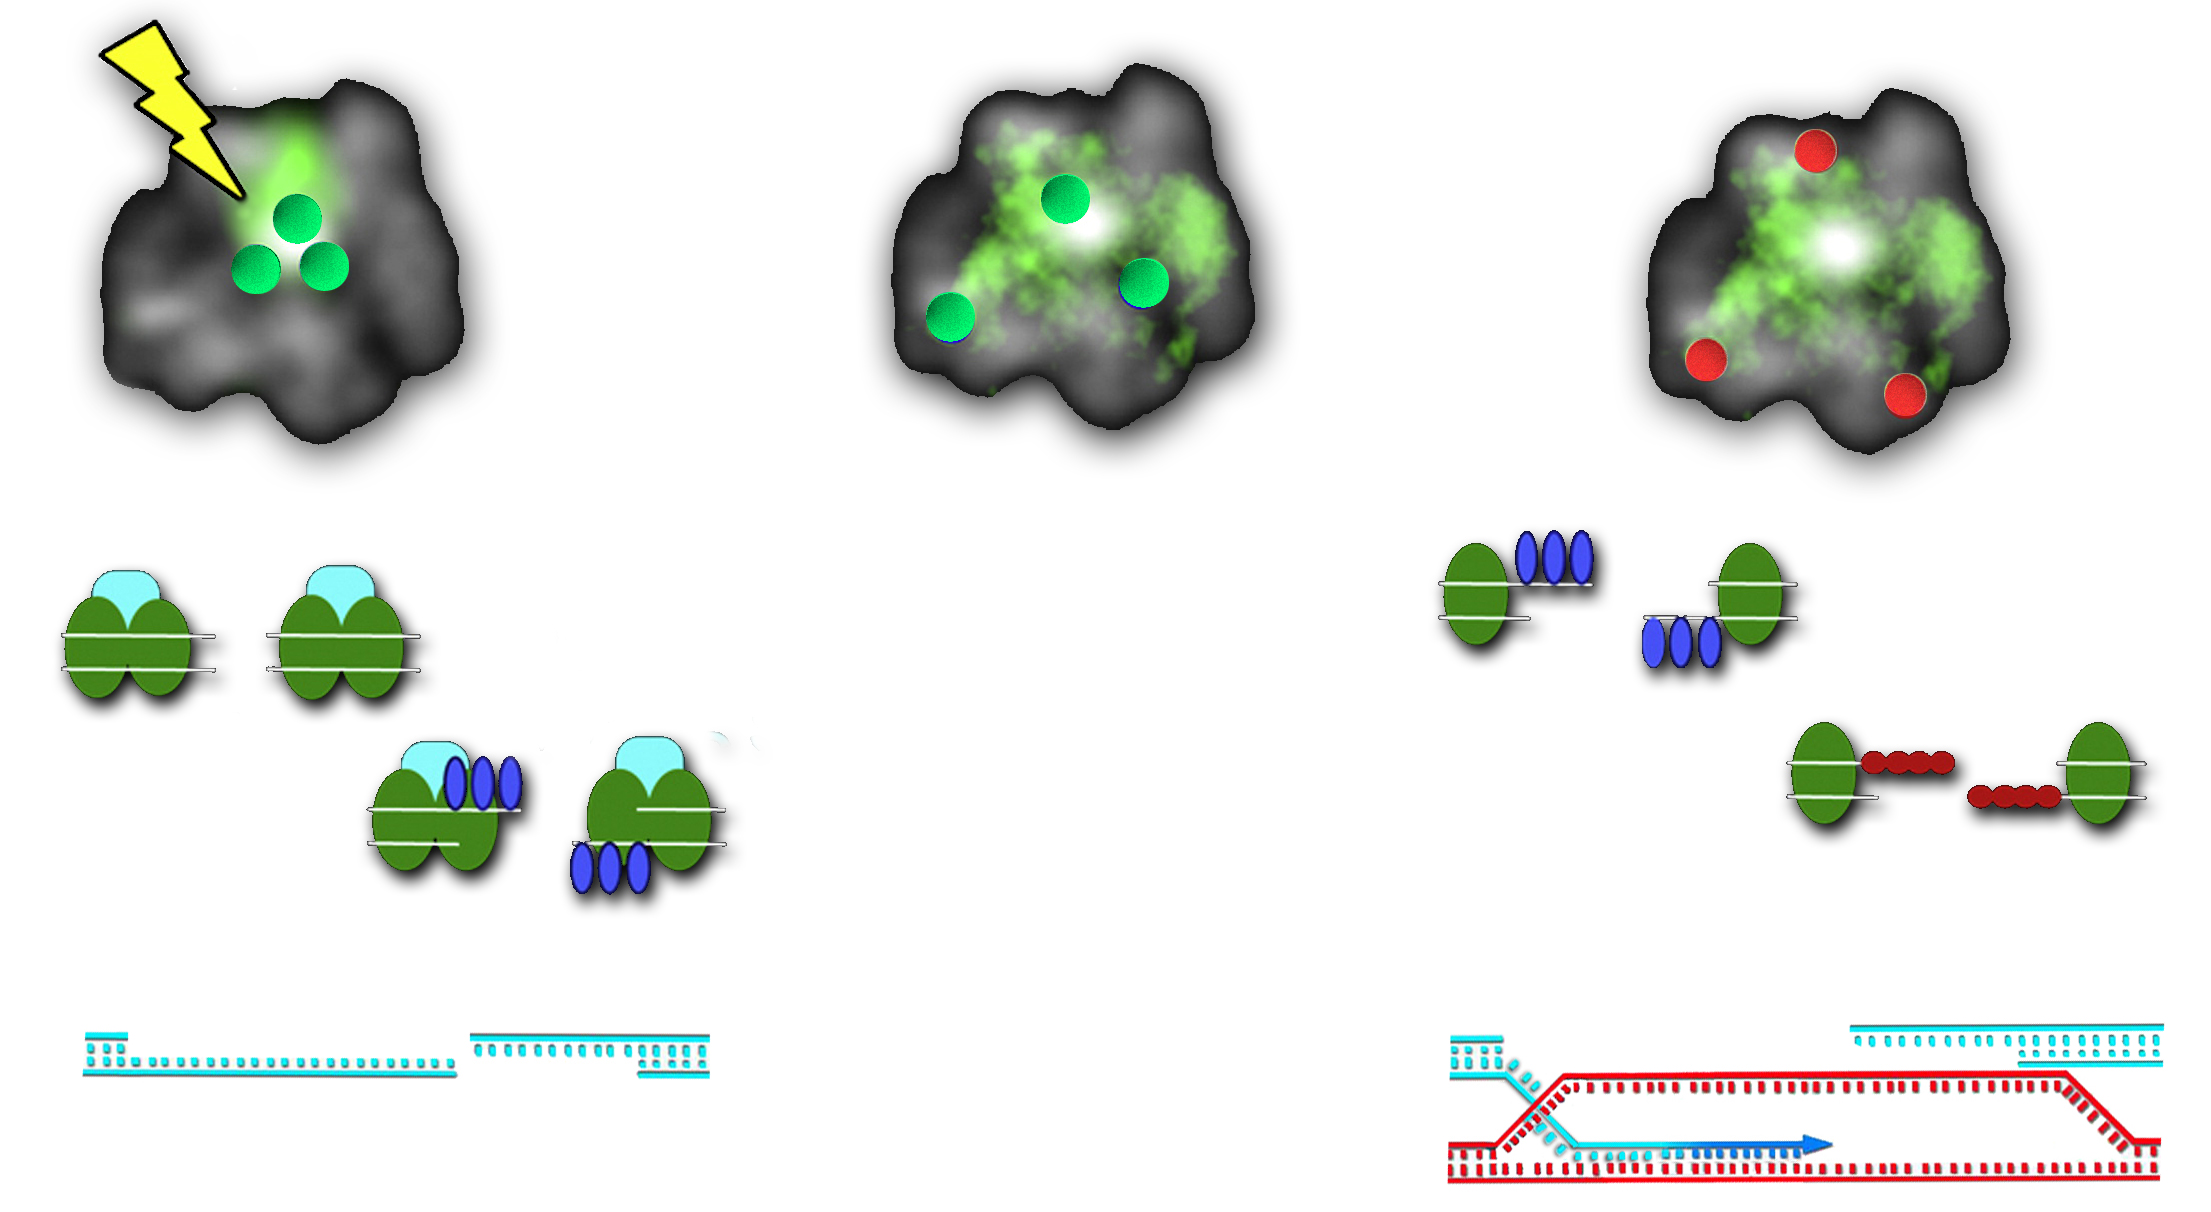 At left, when double-strand breaks occur in heterochromatin DNA, proteins including HP1a and Smc5/6 gather at sites needing repair (blue and green). (HP stands for heterochromatin protein; SMC stands for structural maintenance of chromosomes.) The first stage of repair, resection, occurs immediately, but meanwhile the heterochromatin domain is rapidly expanding and Smc5/6 prevents the arrival of other repair proteins (center). Once the break sites have moved outside the domain, Rad51 (red) can go to work helping filaments invade complementary DNA to finish the homologous repair job (right).